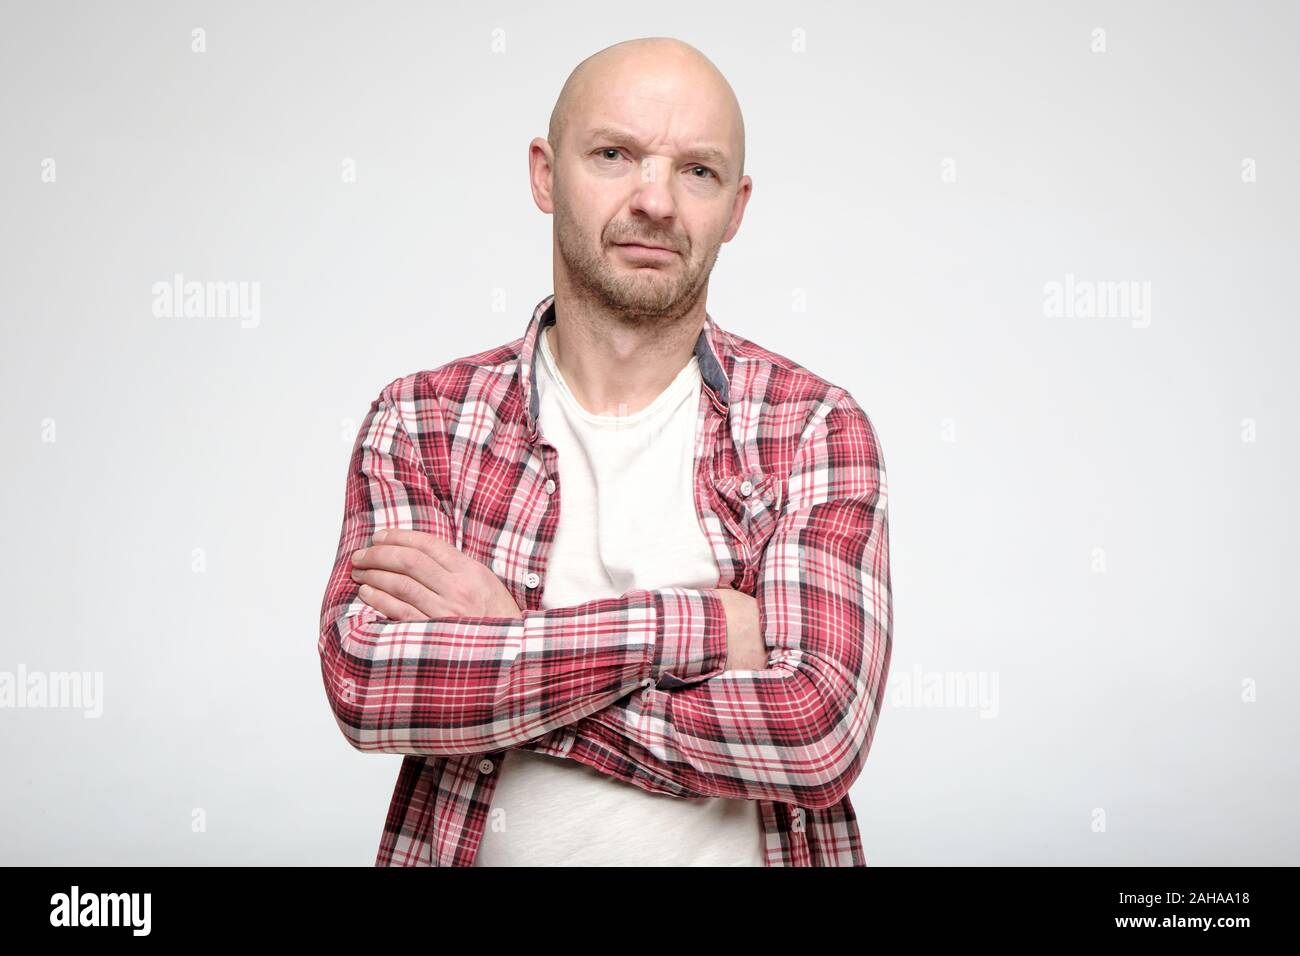 Pensive, frowning bald man is standing with his arms crossed and looking at the camera. Stock Photo